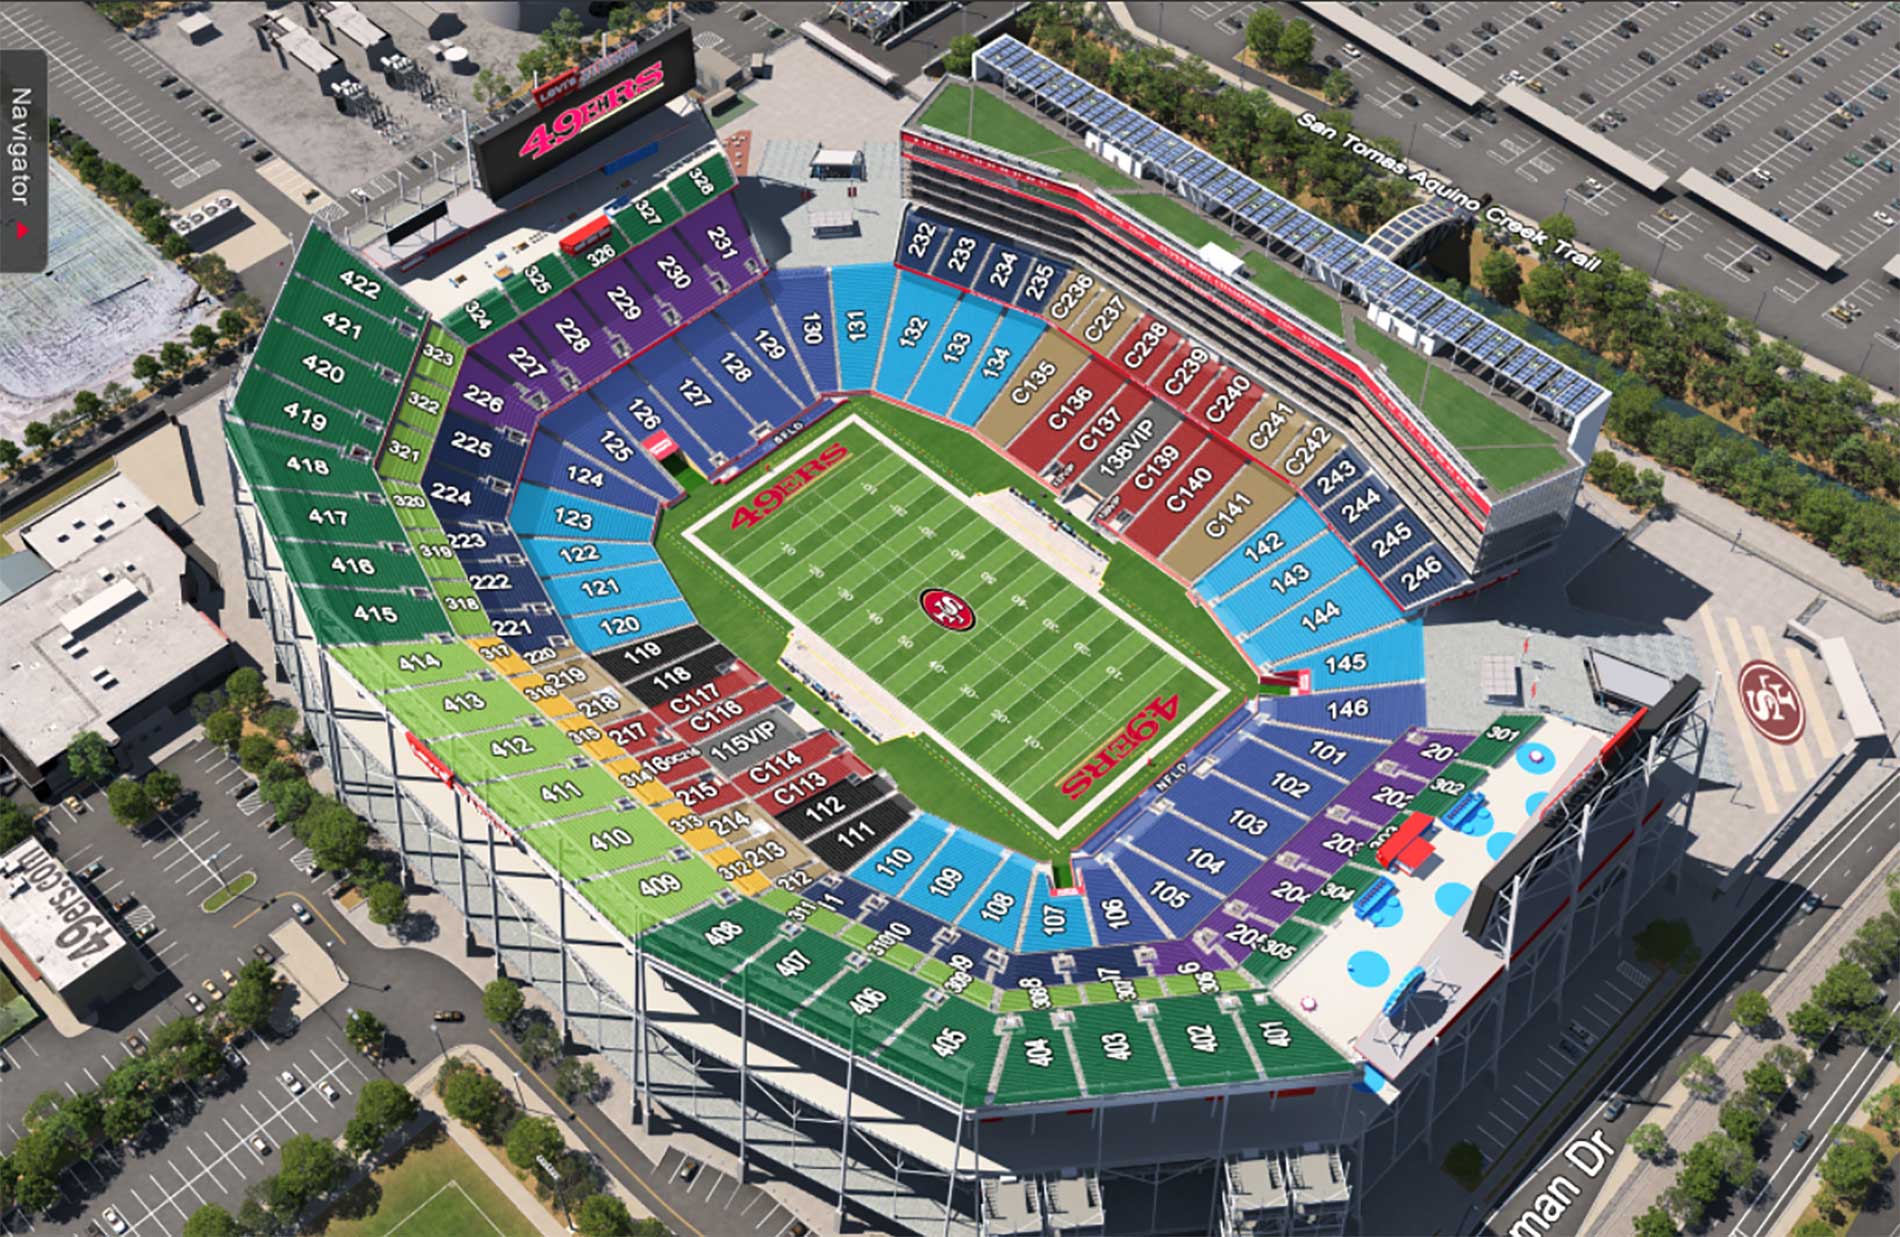 An aerial phot of a huge stadium, overlaid with graphics illustrating different seating.